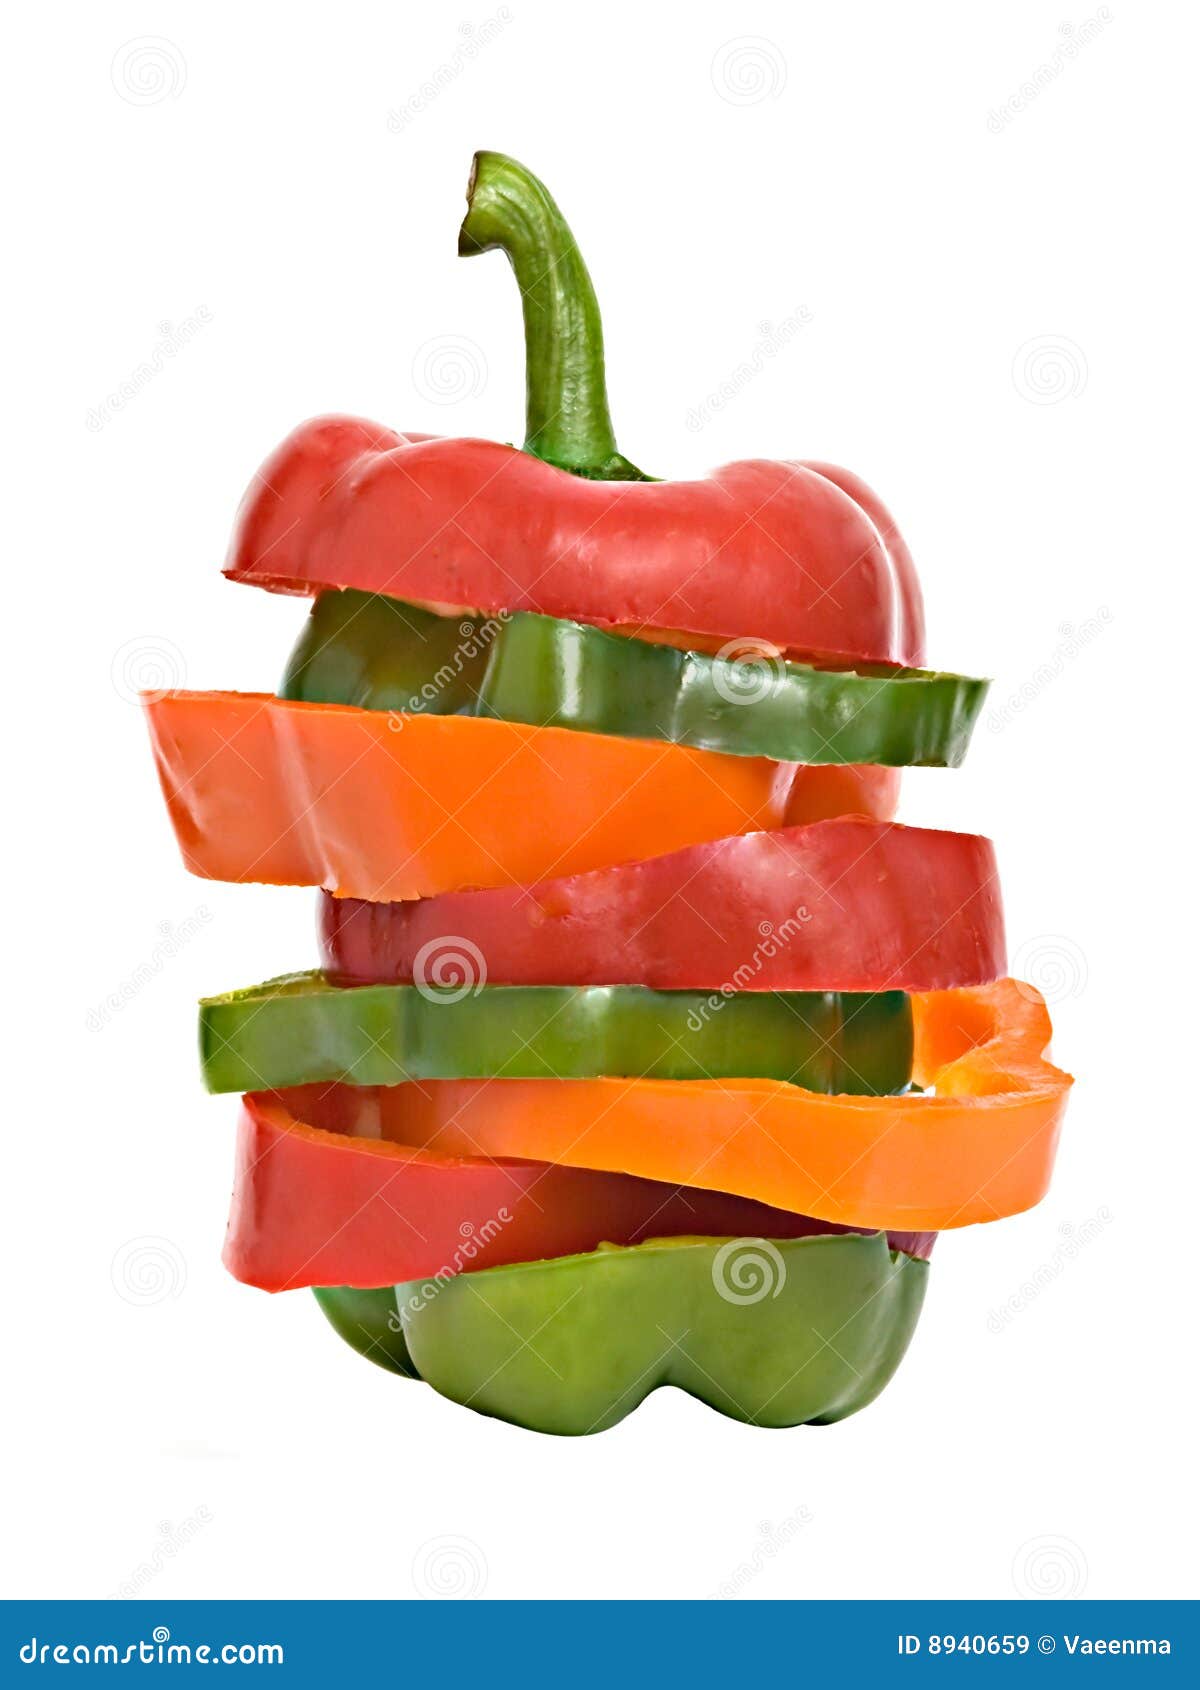 longitudinal sections of colorful sweet peppers